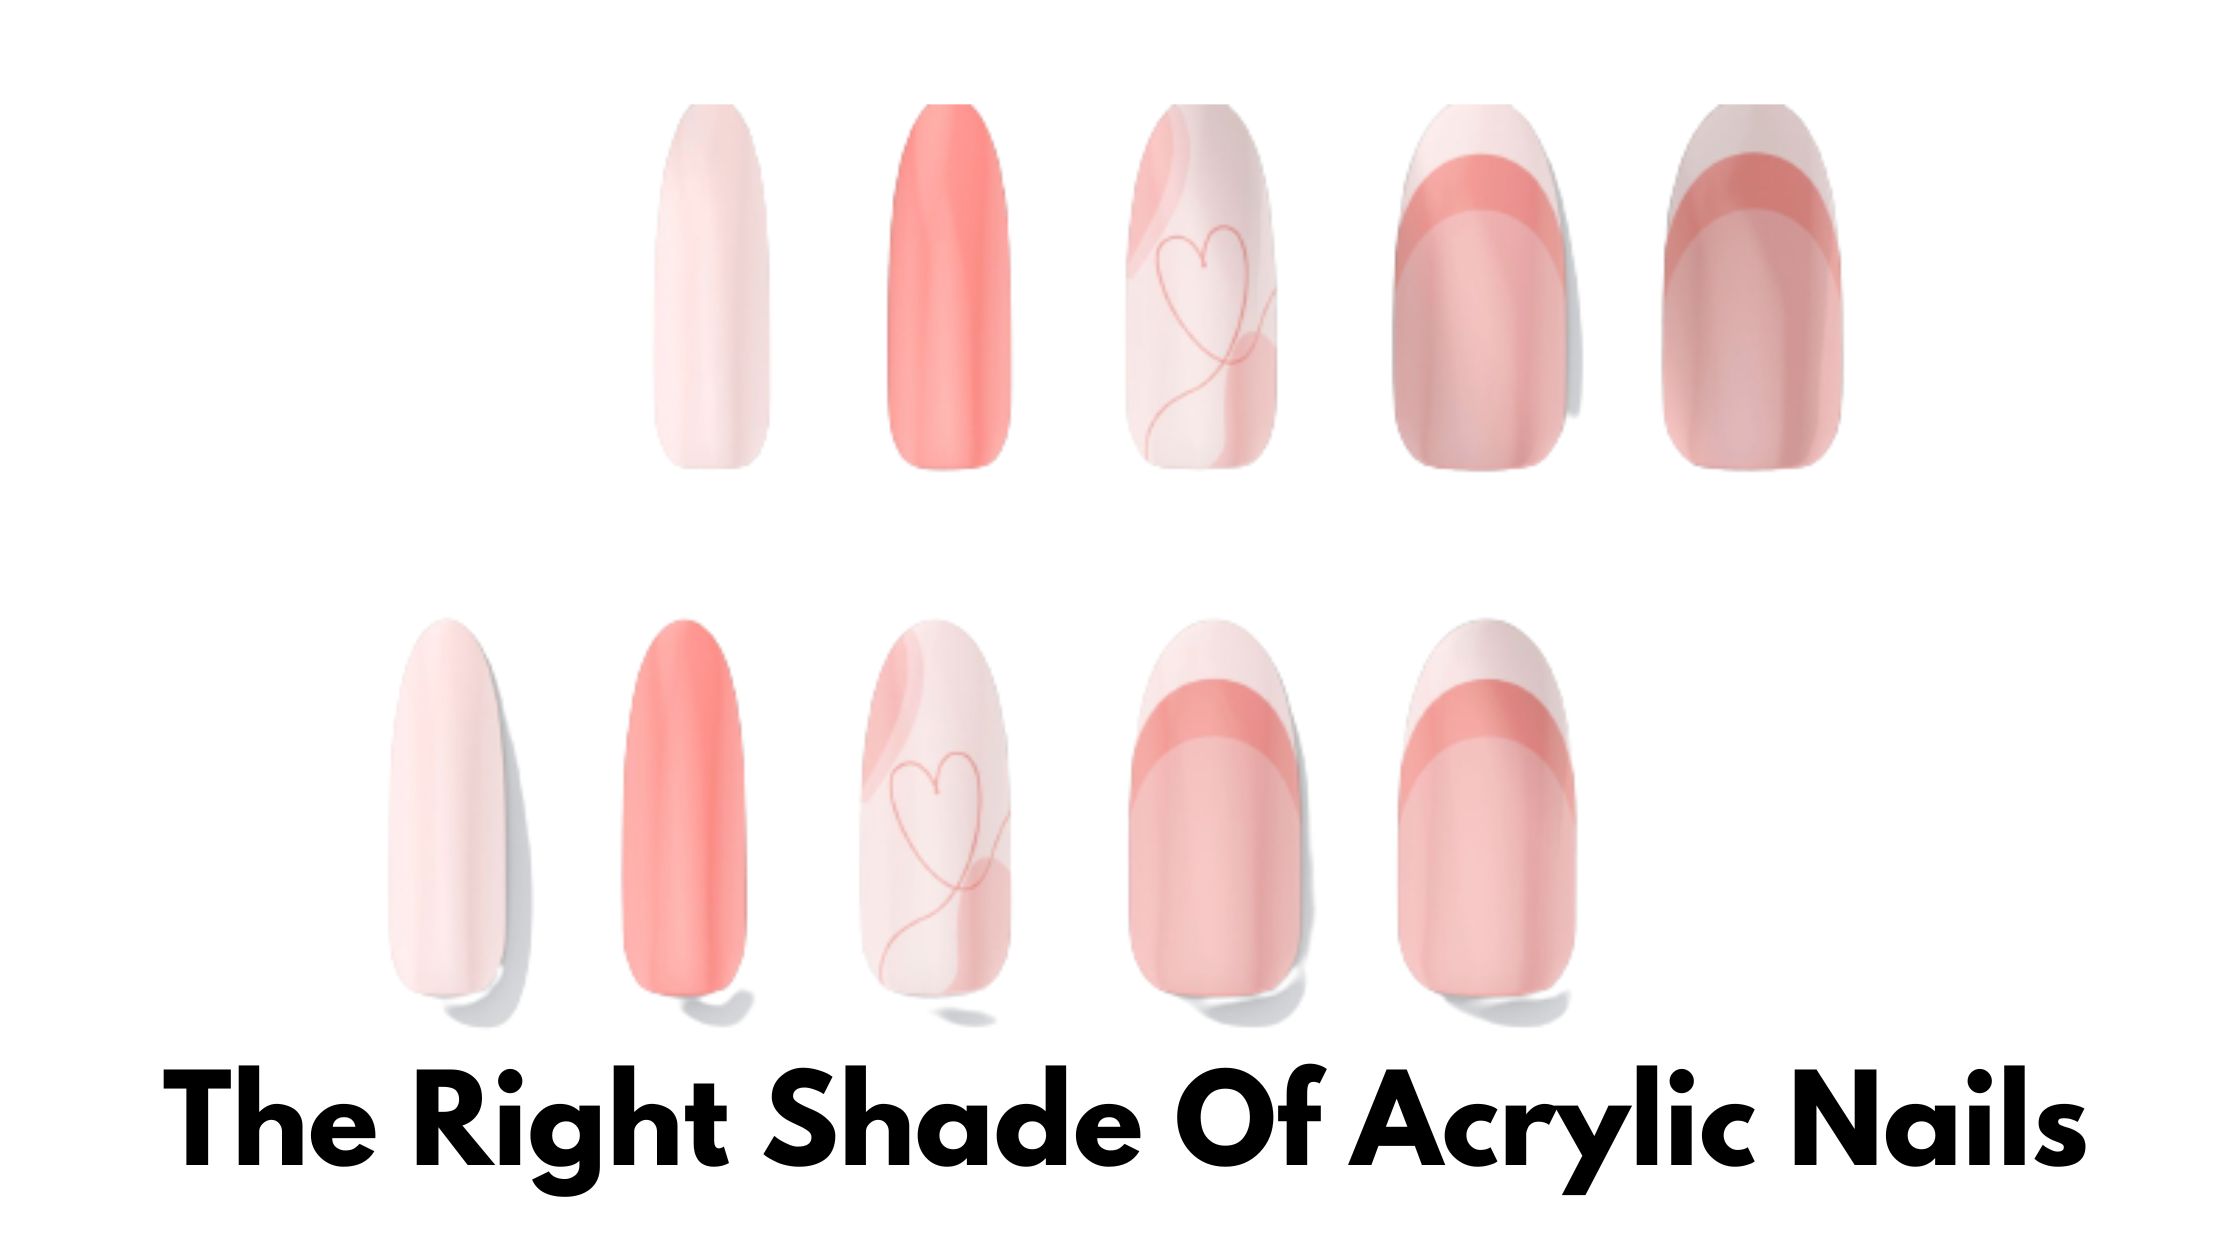 How To Pick The Right Shade Of Acrylic Nails For Your Skin Tone